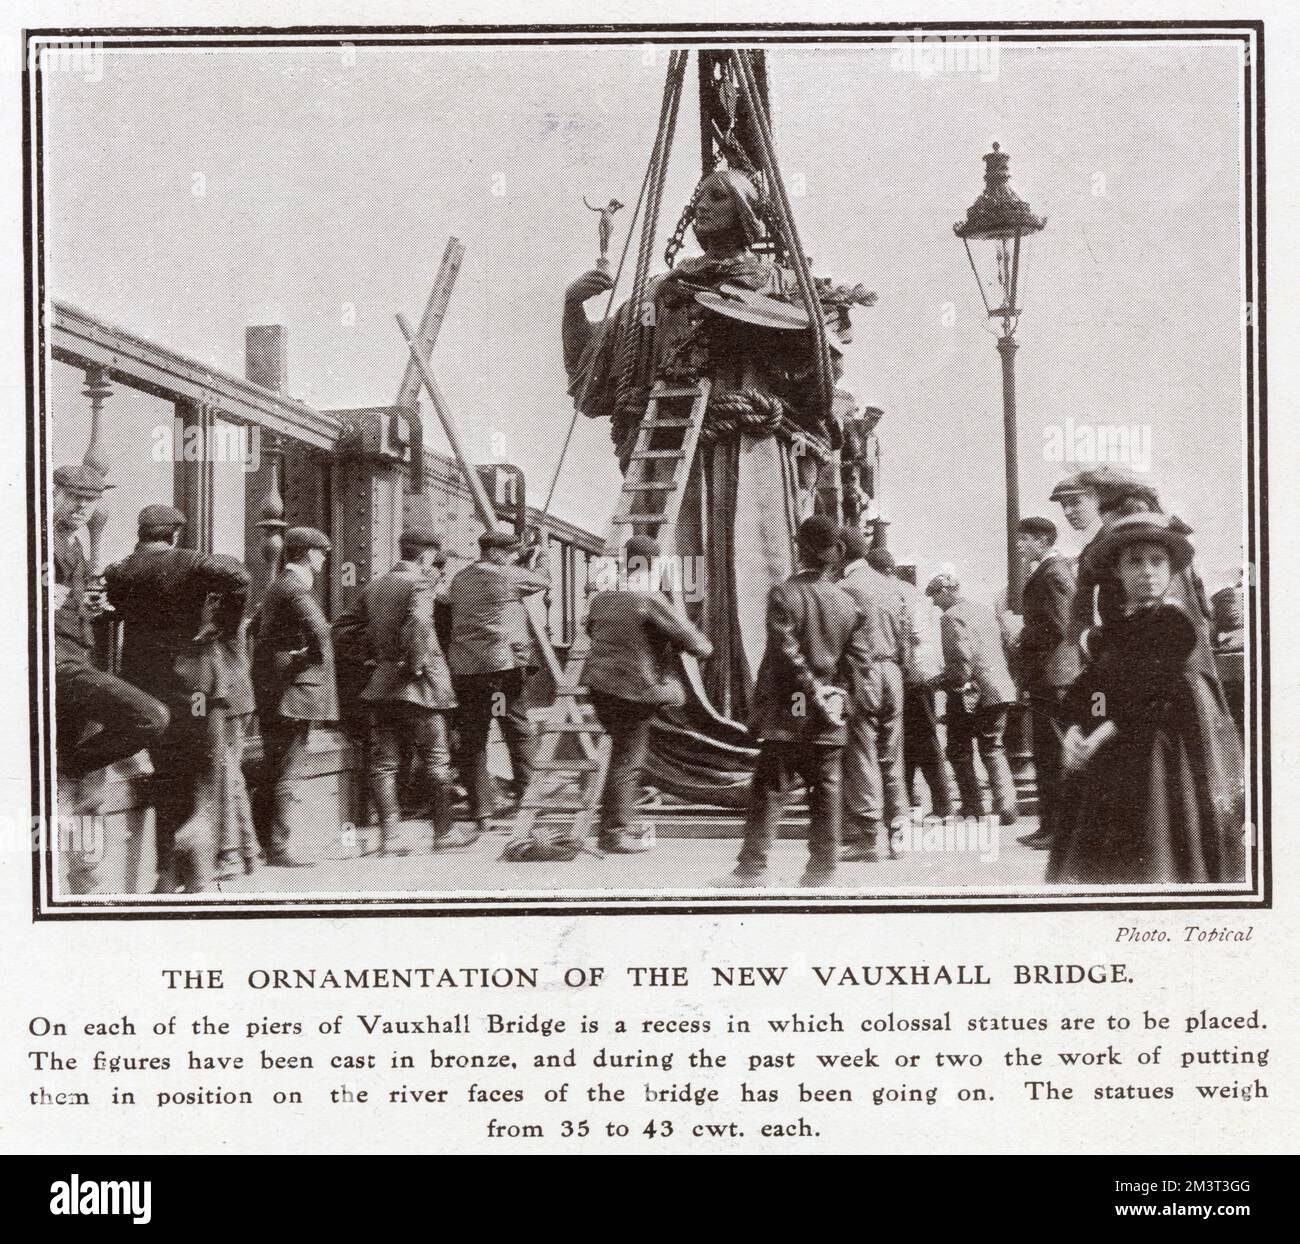 Vauxhall Bridge that opened in 1906, replacing one built between 1809 and 1816. Alfred Drury, George Frampton and Frederick Pomeroy were appointed to design appropriate statues on each of the recesses. Photograph showing a pulley is placing the colossal bronze figure weighing 35 to 43 cwt each. Stock Photo